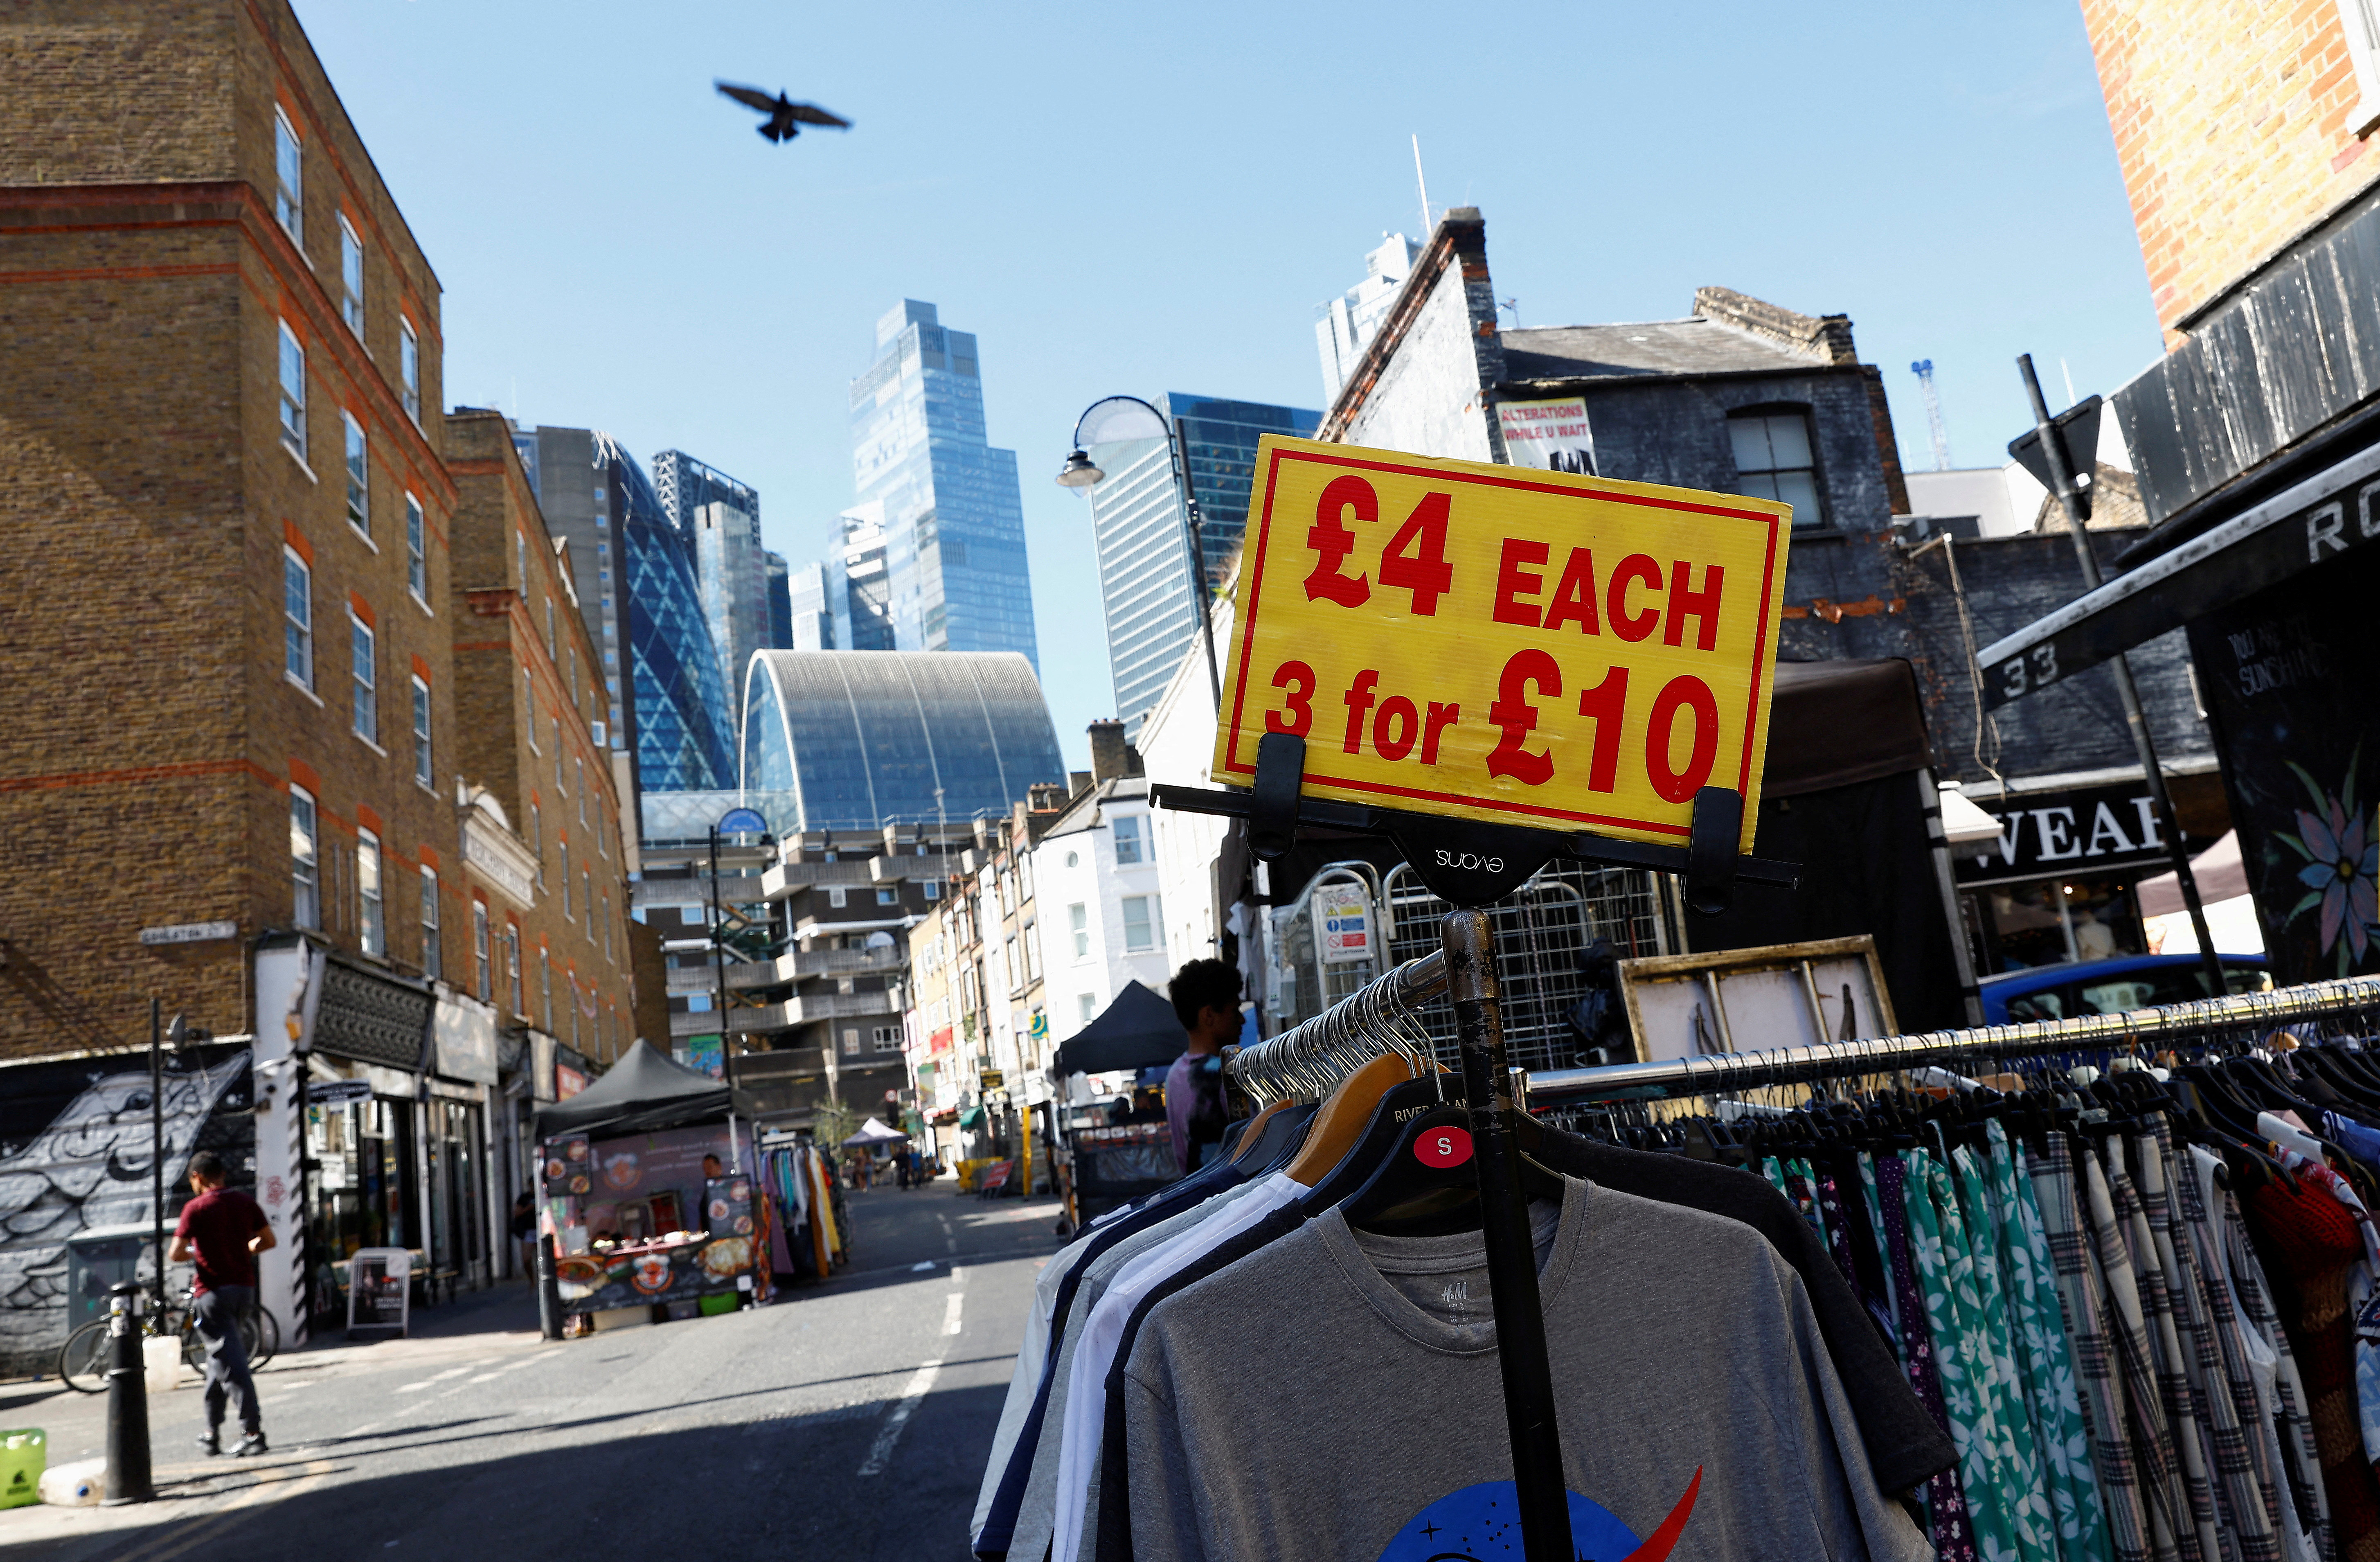 A view of City of London financial district behind Petticoat Lane street market